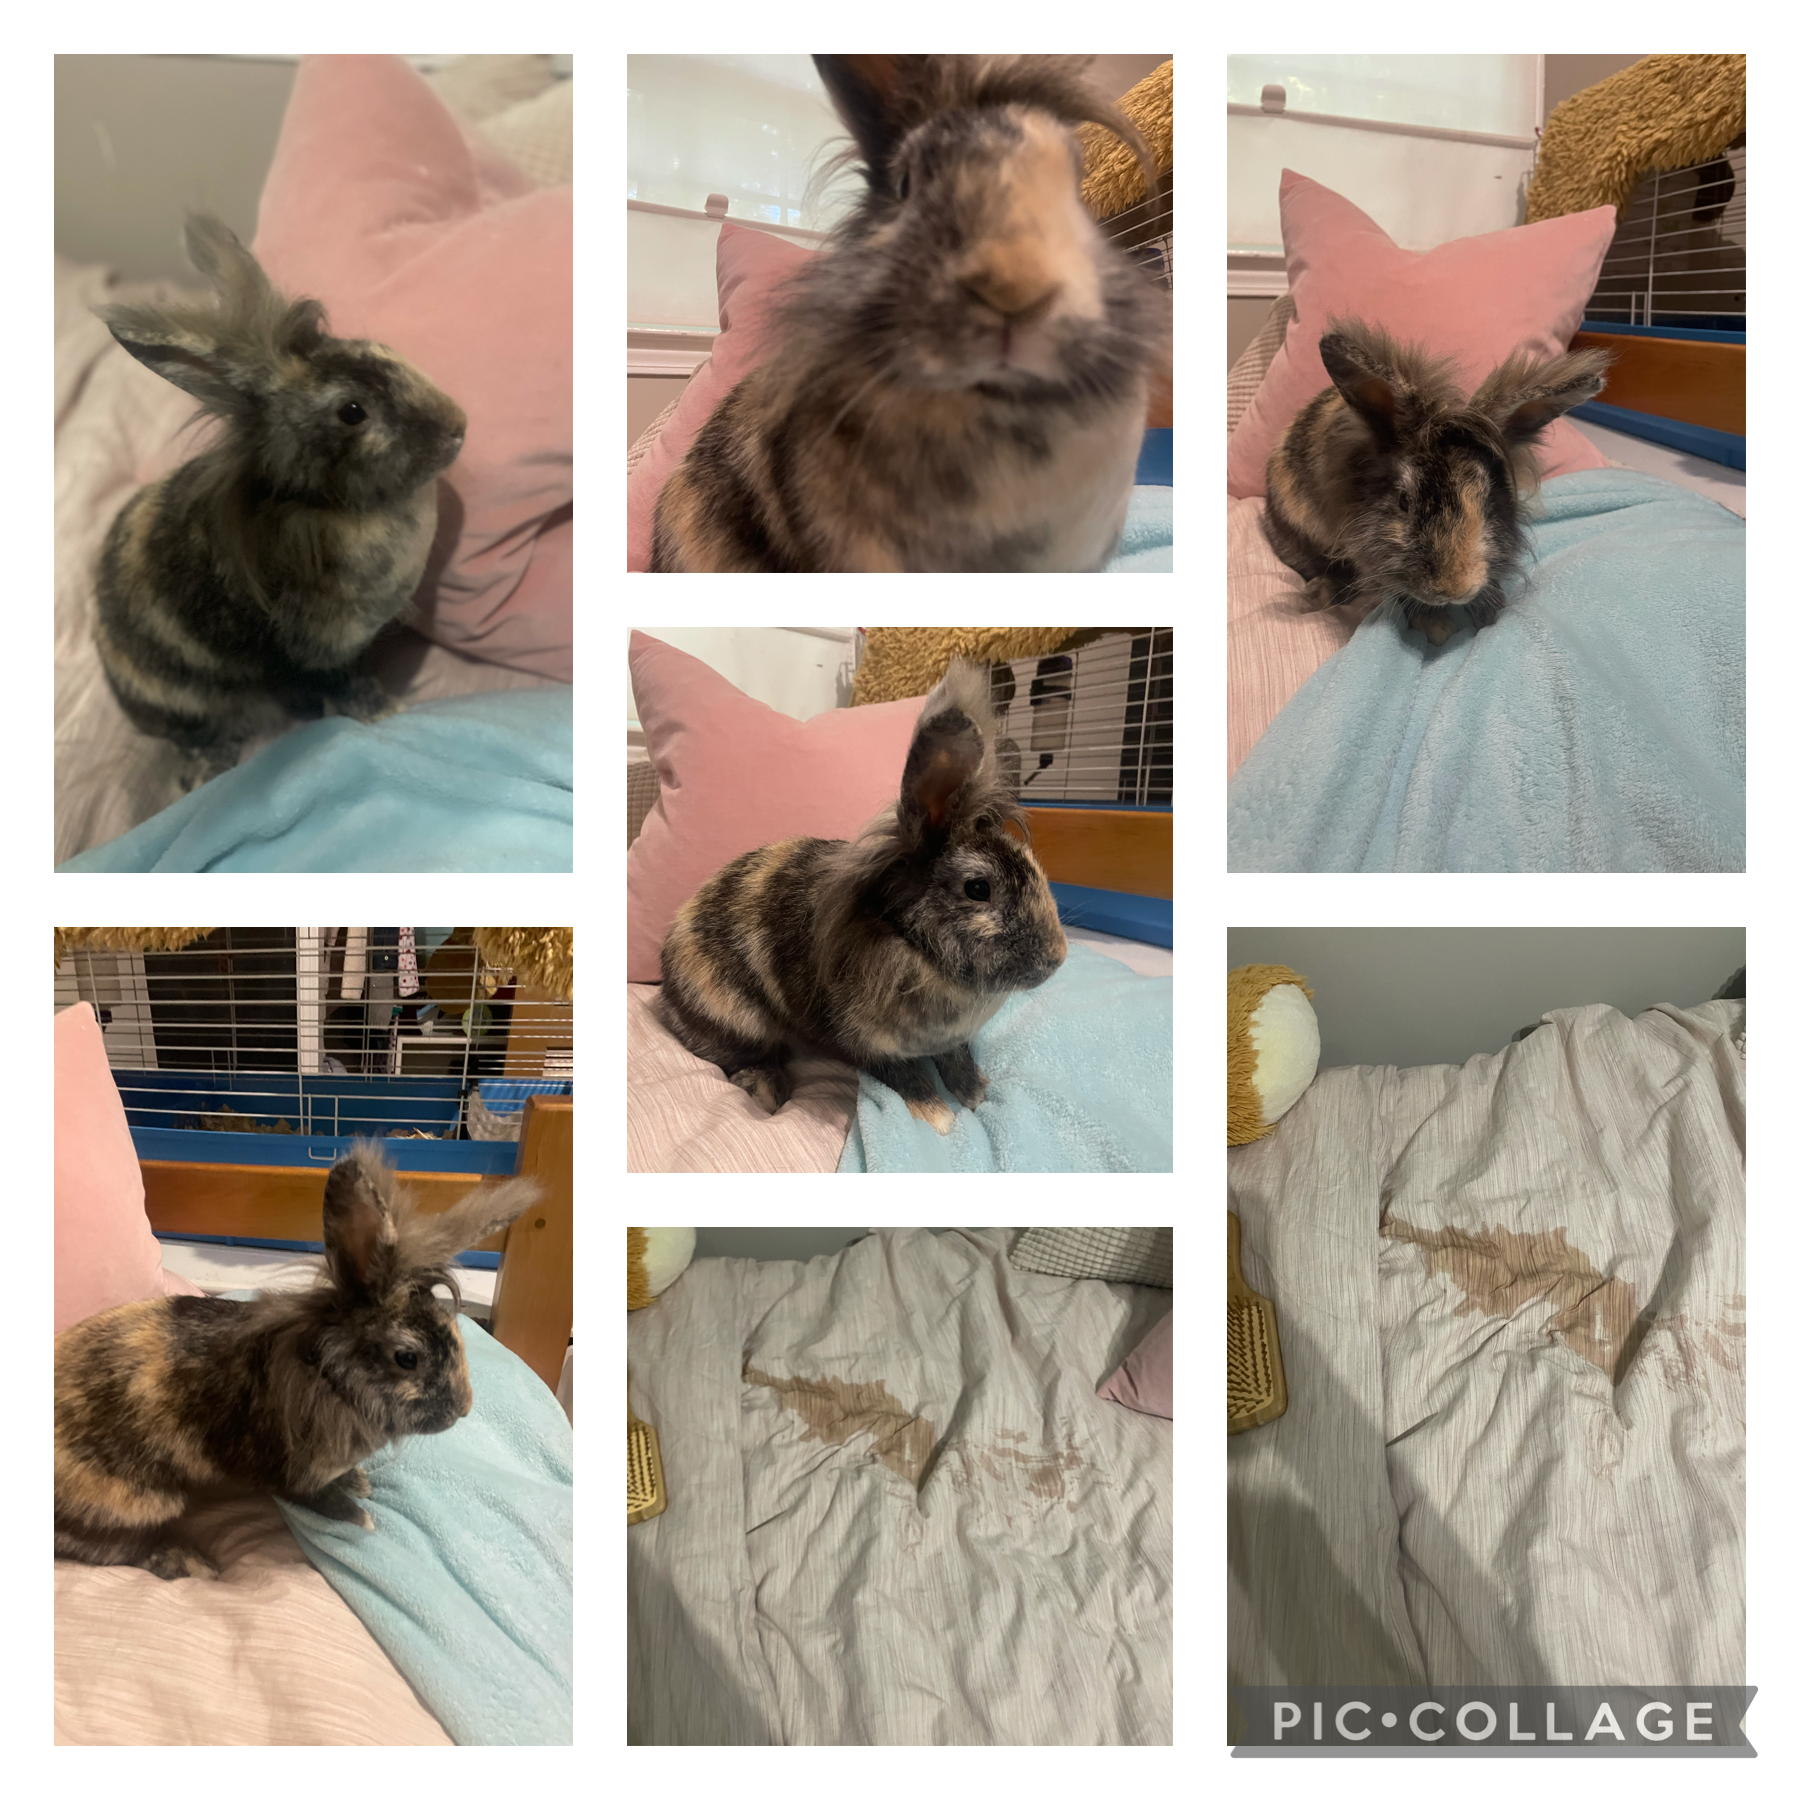 The last two are results of bunny photo shoot#pee#messy-bunny 🥲